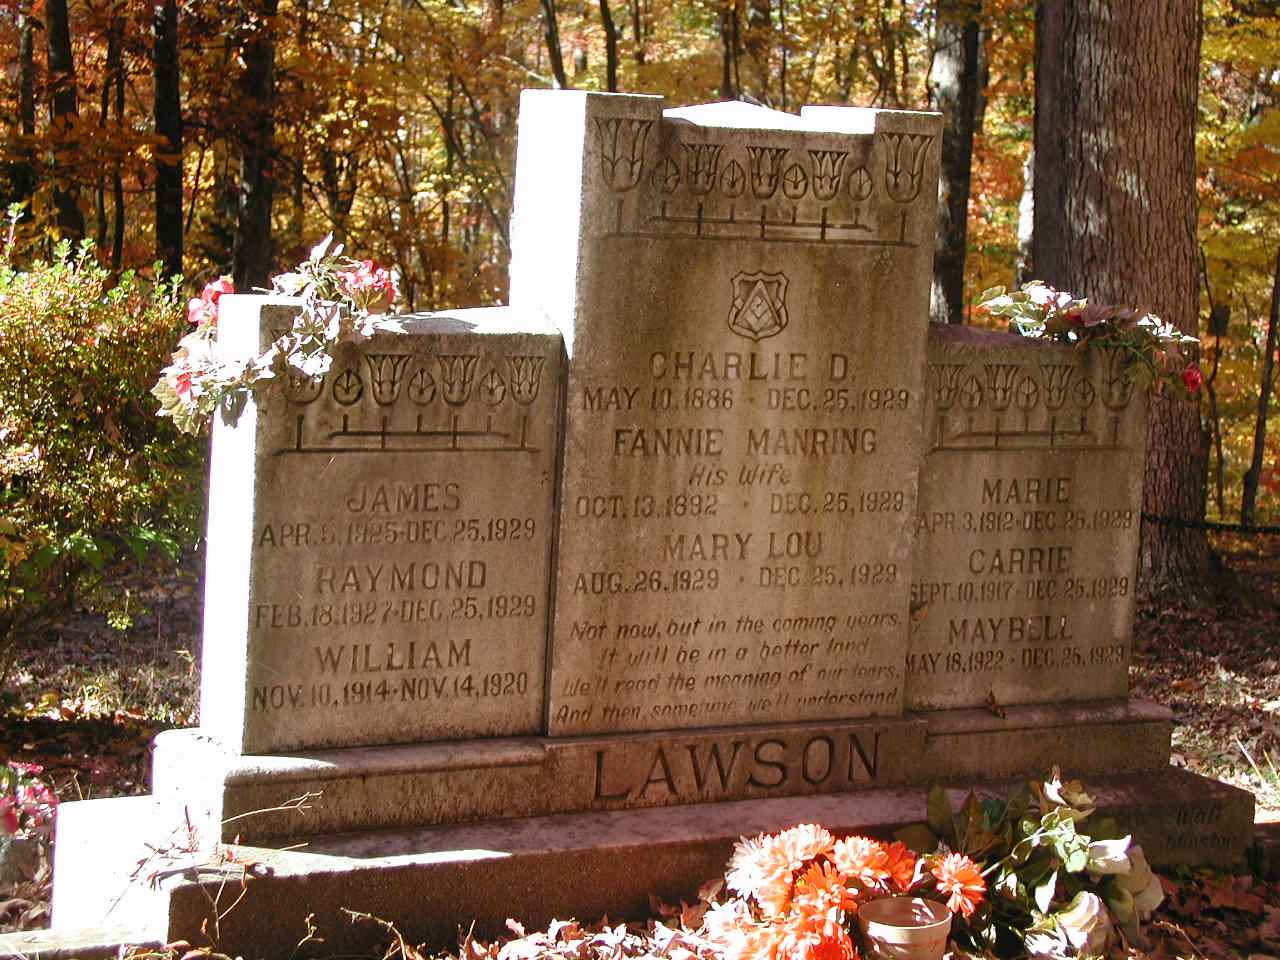 What was the Motive Behind Lawson Family's Killing